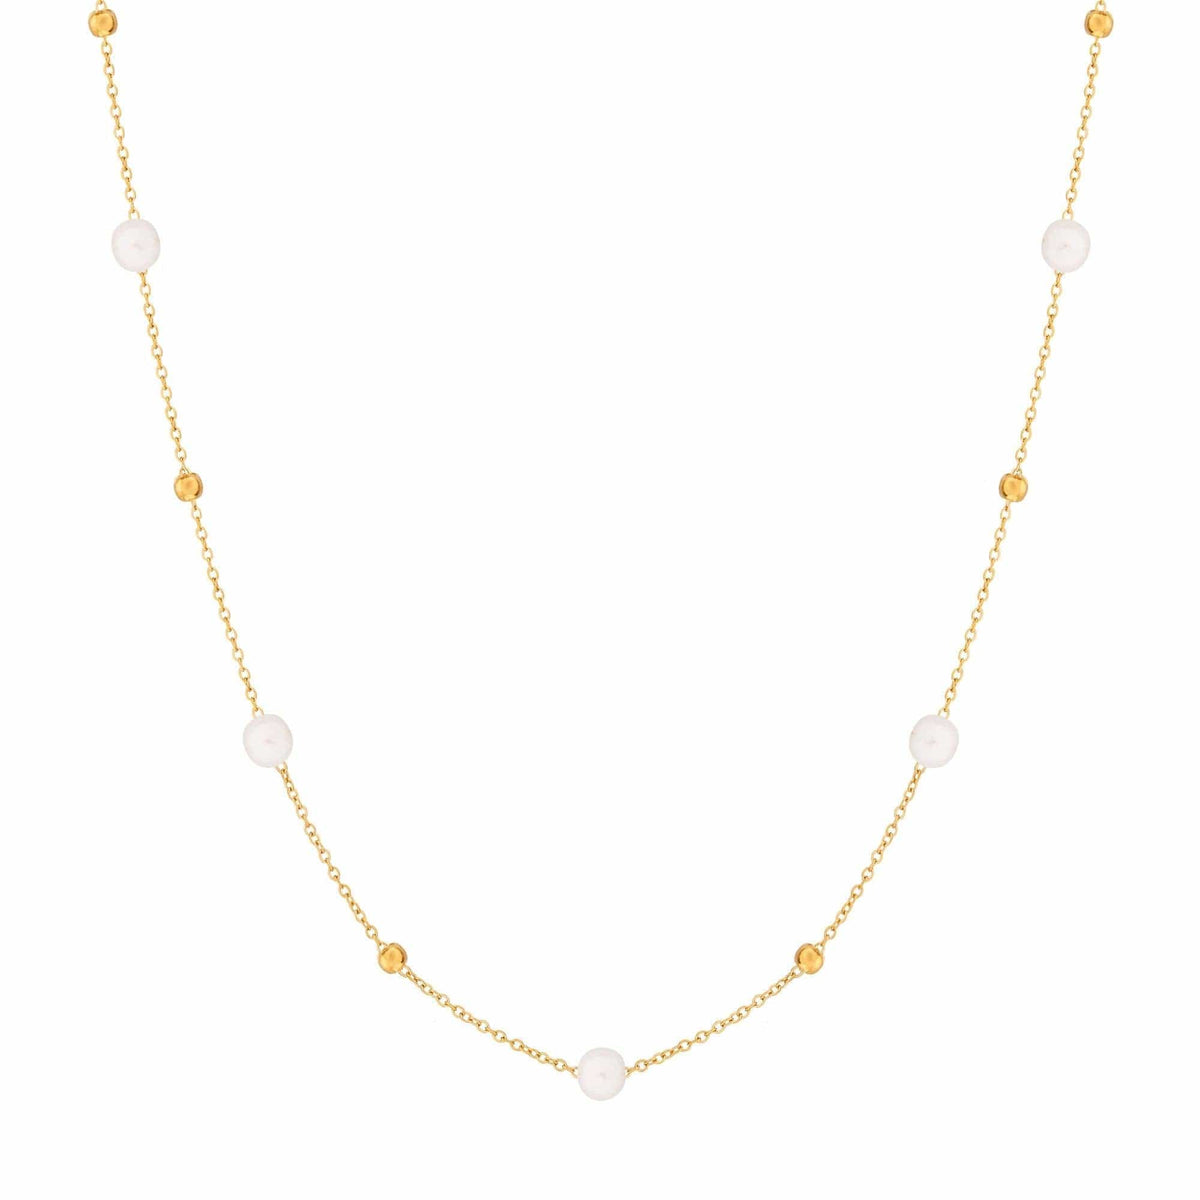 BohoMoon Stainless Steel Paradise Pearl Necklace Gold